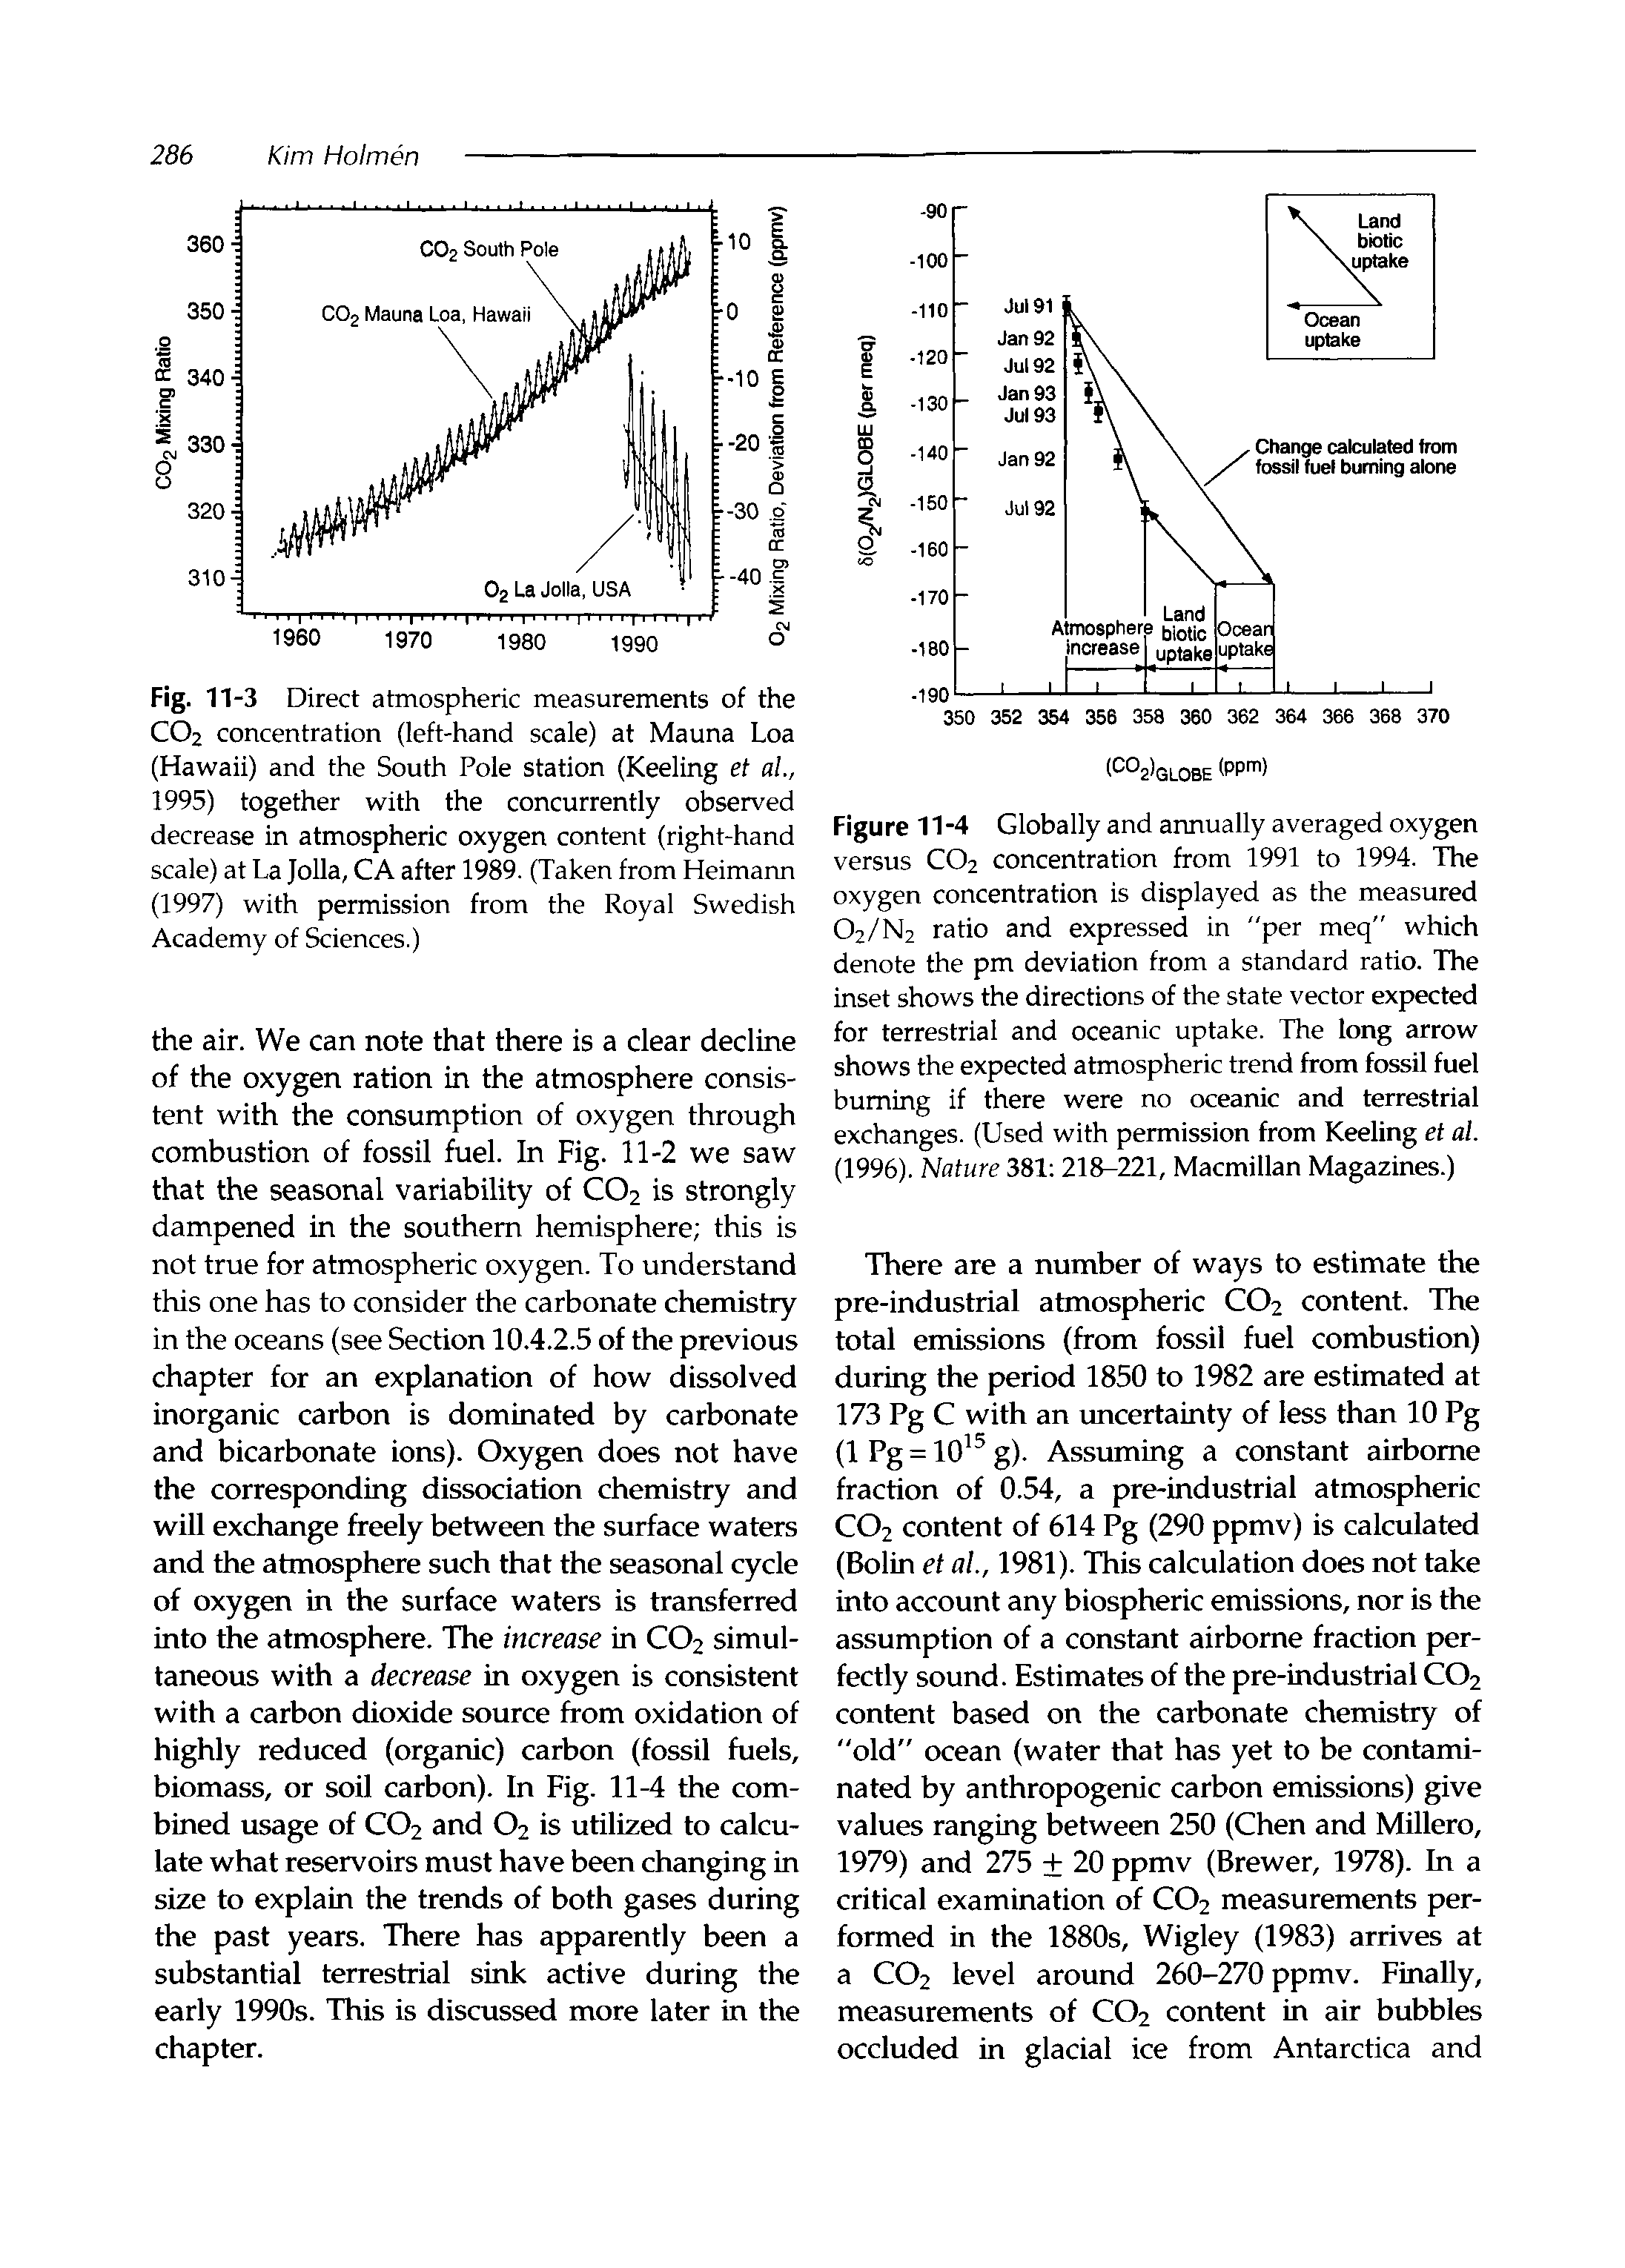 Figure 11-4 Globally and annually averaged oxygen versus CO2 concentration from 1991 to 1994. The oxygen concentration is displayed as the measured O2/N2 ratio and expressed in per meq" which denote the pm deviation from a standard ratio. The inset shows the directions of the state vector expected for terrestrial and oceanic uptake. The long arrow shows the expected atmospheric trend from fossil fuel burning if there were no oceanic and terrestrial exchanges. (Used with permission from Keeling et al. (1996). Nature 381 218-221, Macmillan Magazines.)...